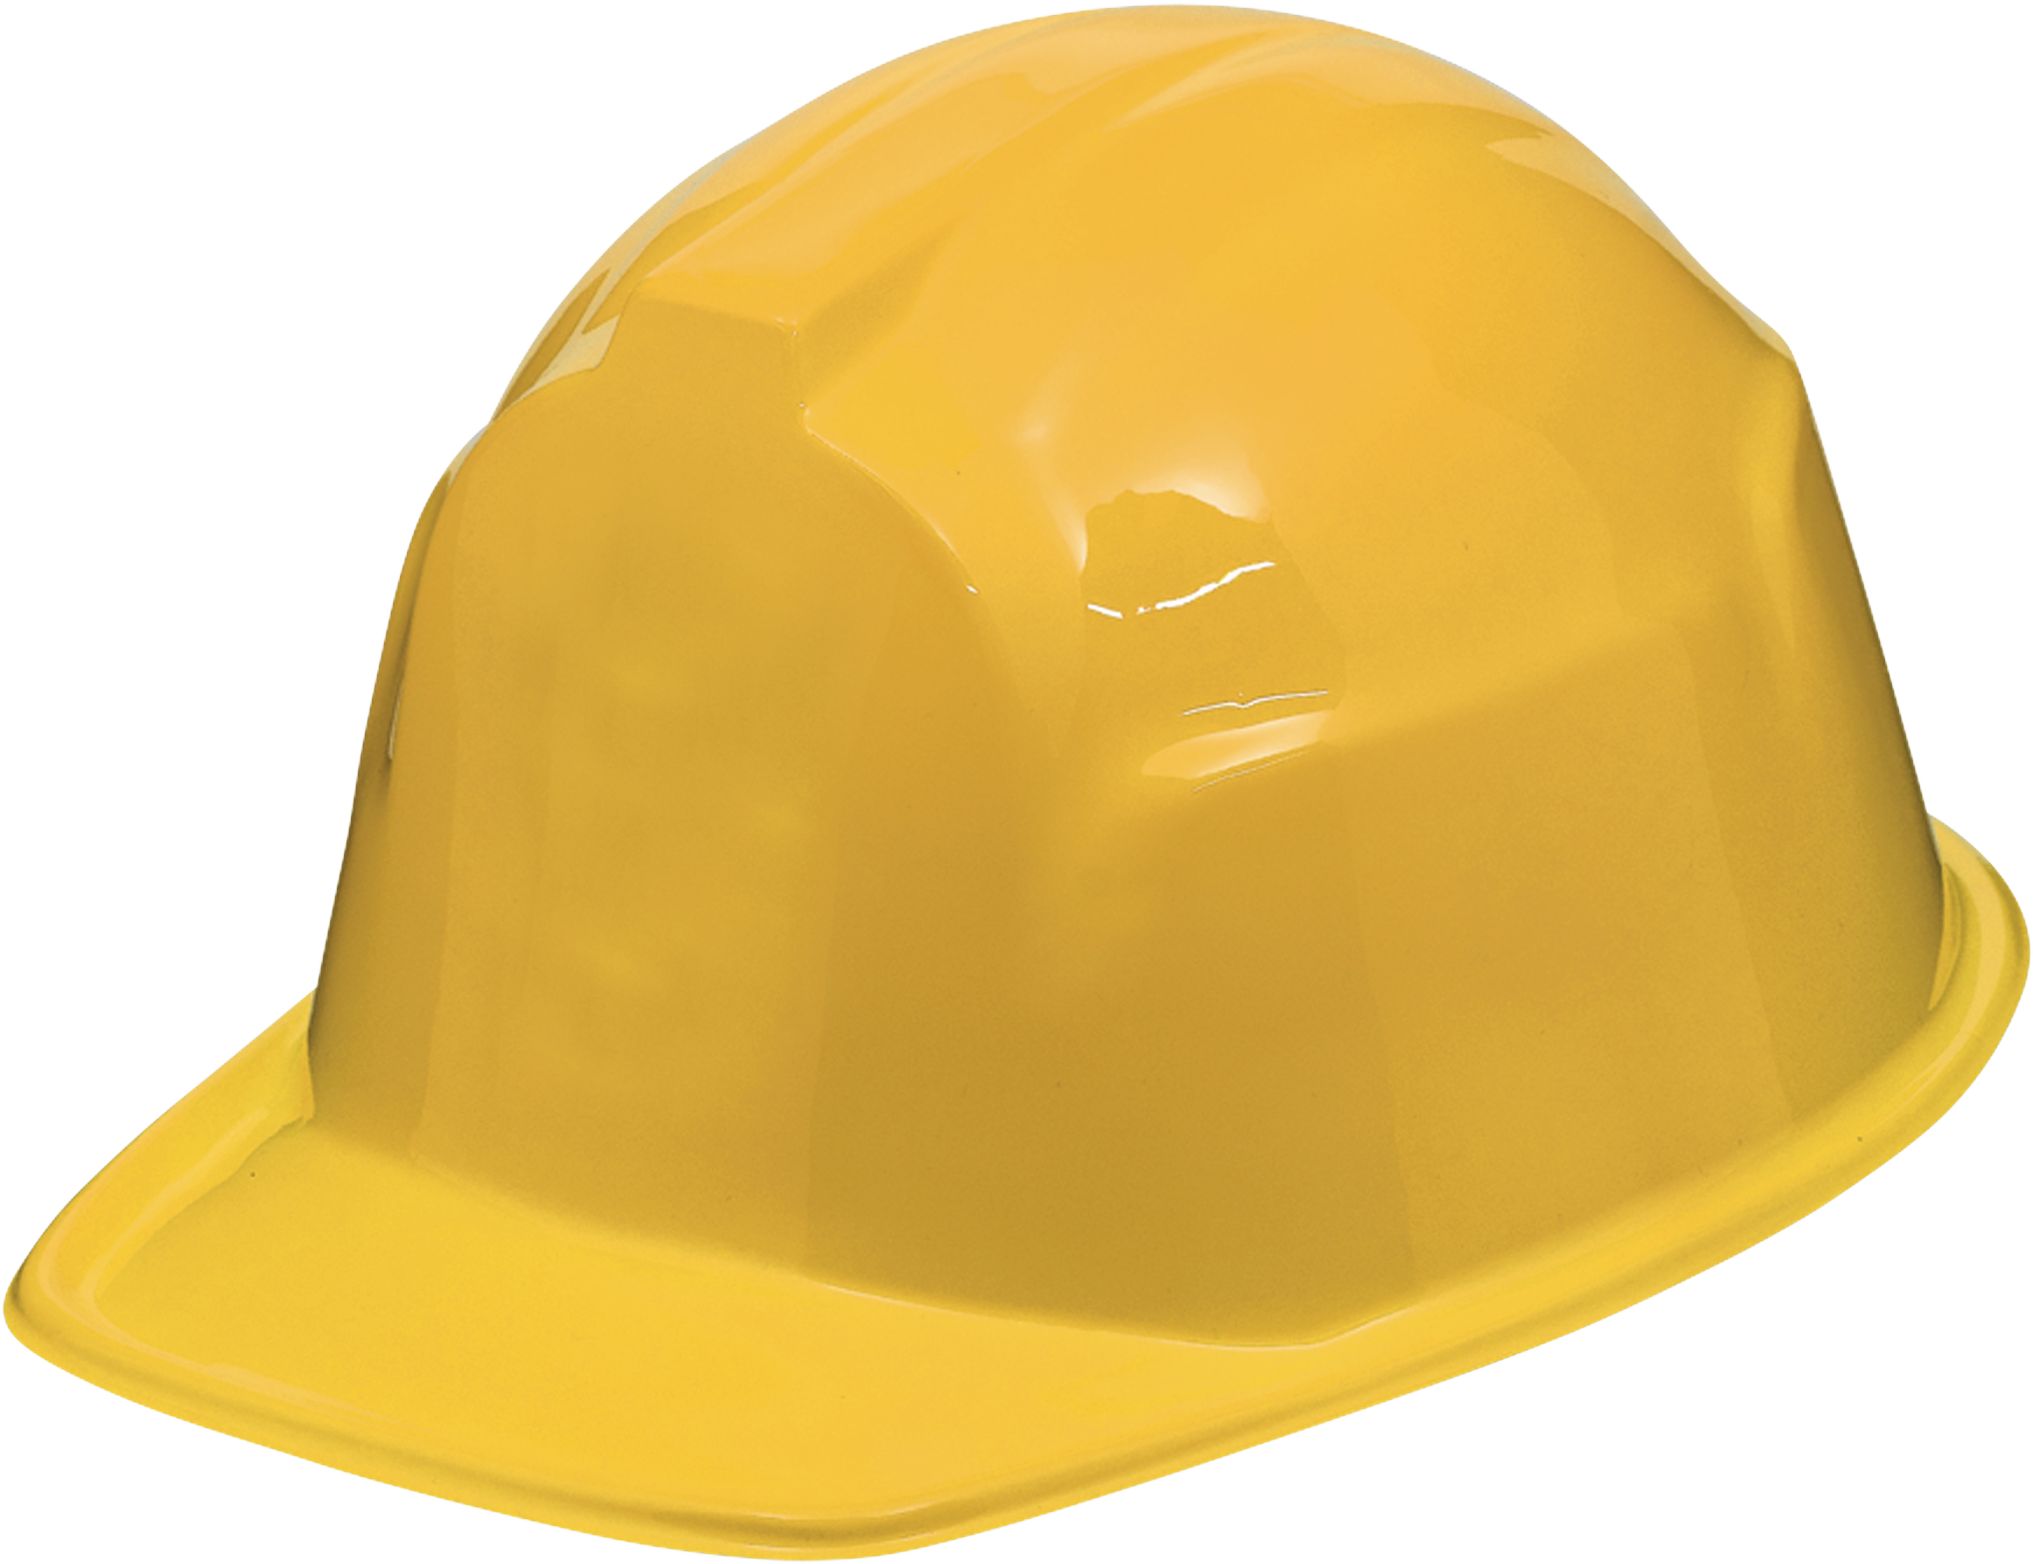 Construction Worker Plastic Hard Hat, Yellow, One Size, Wearable